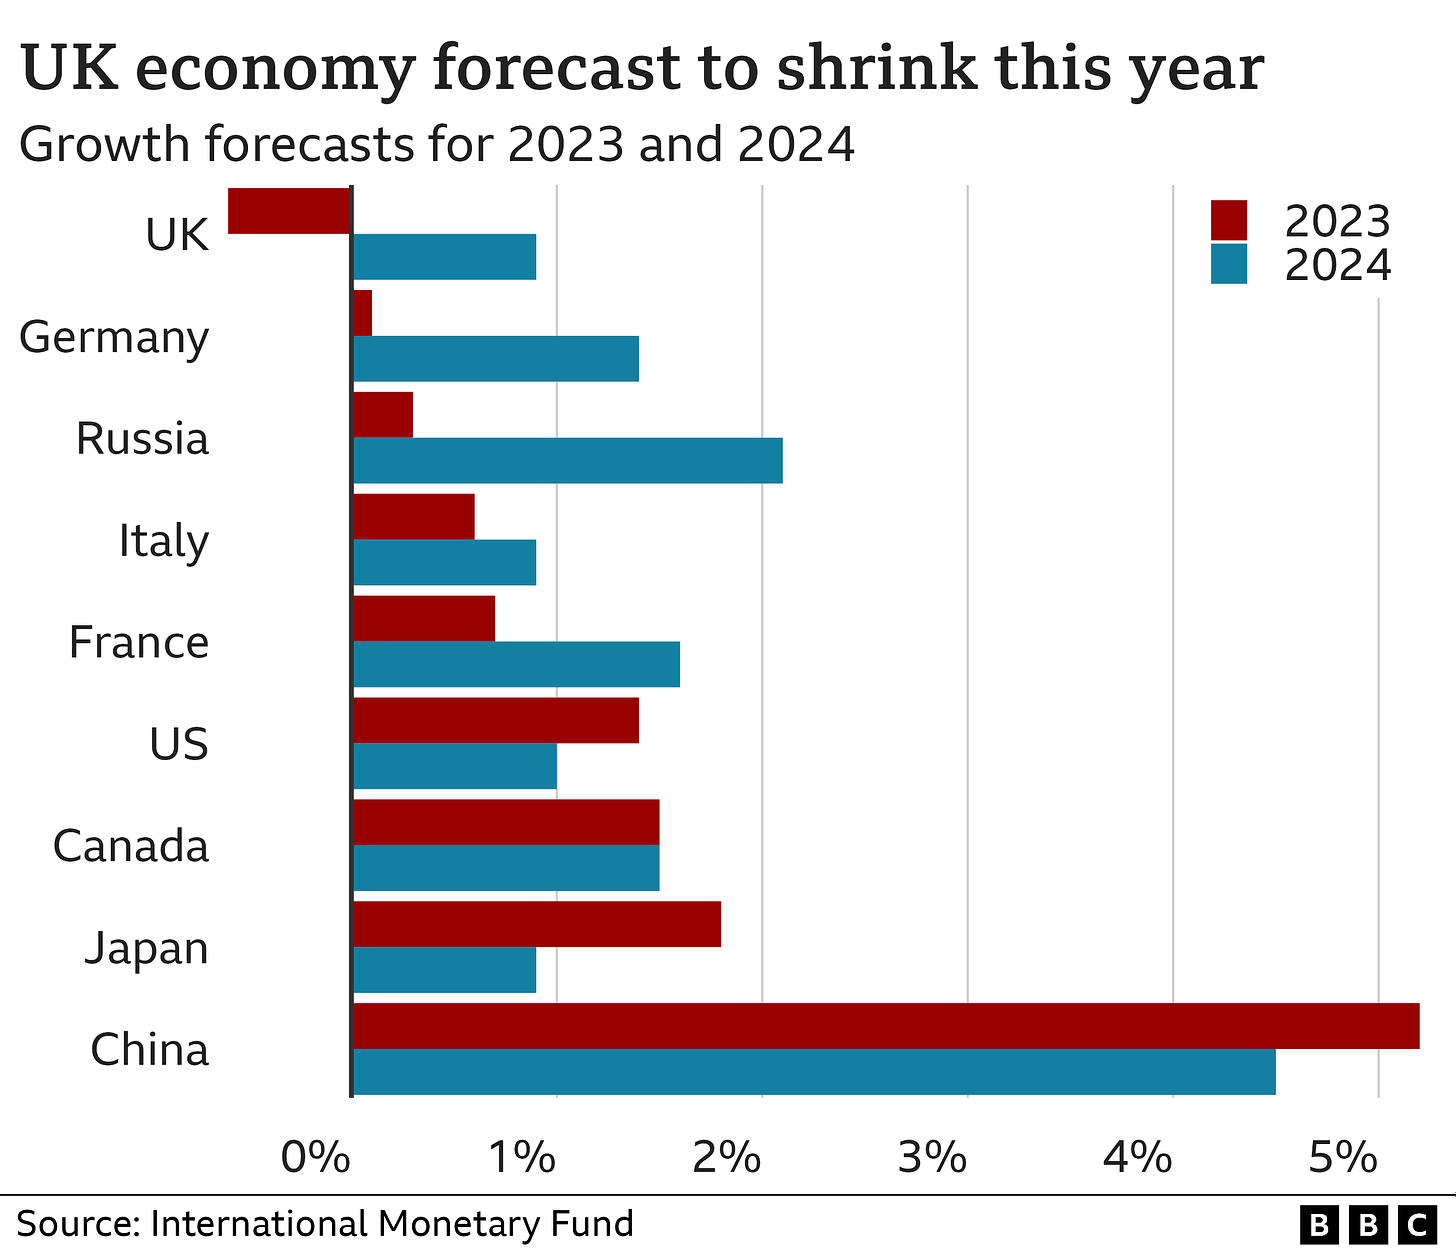 Chart showing projected economic growth for G7 countries, China and Russia. Only the UK is expected to see economic decline in 2023